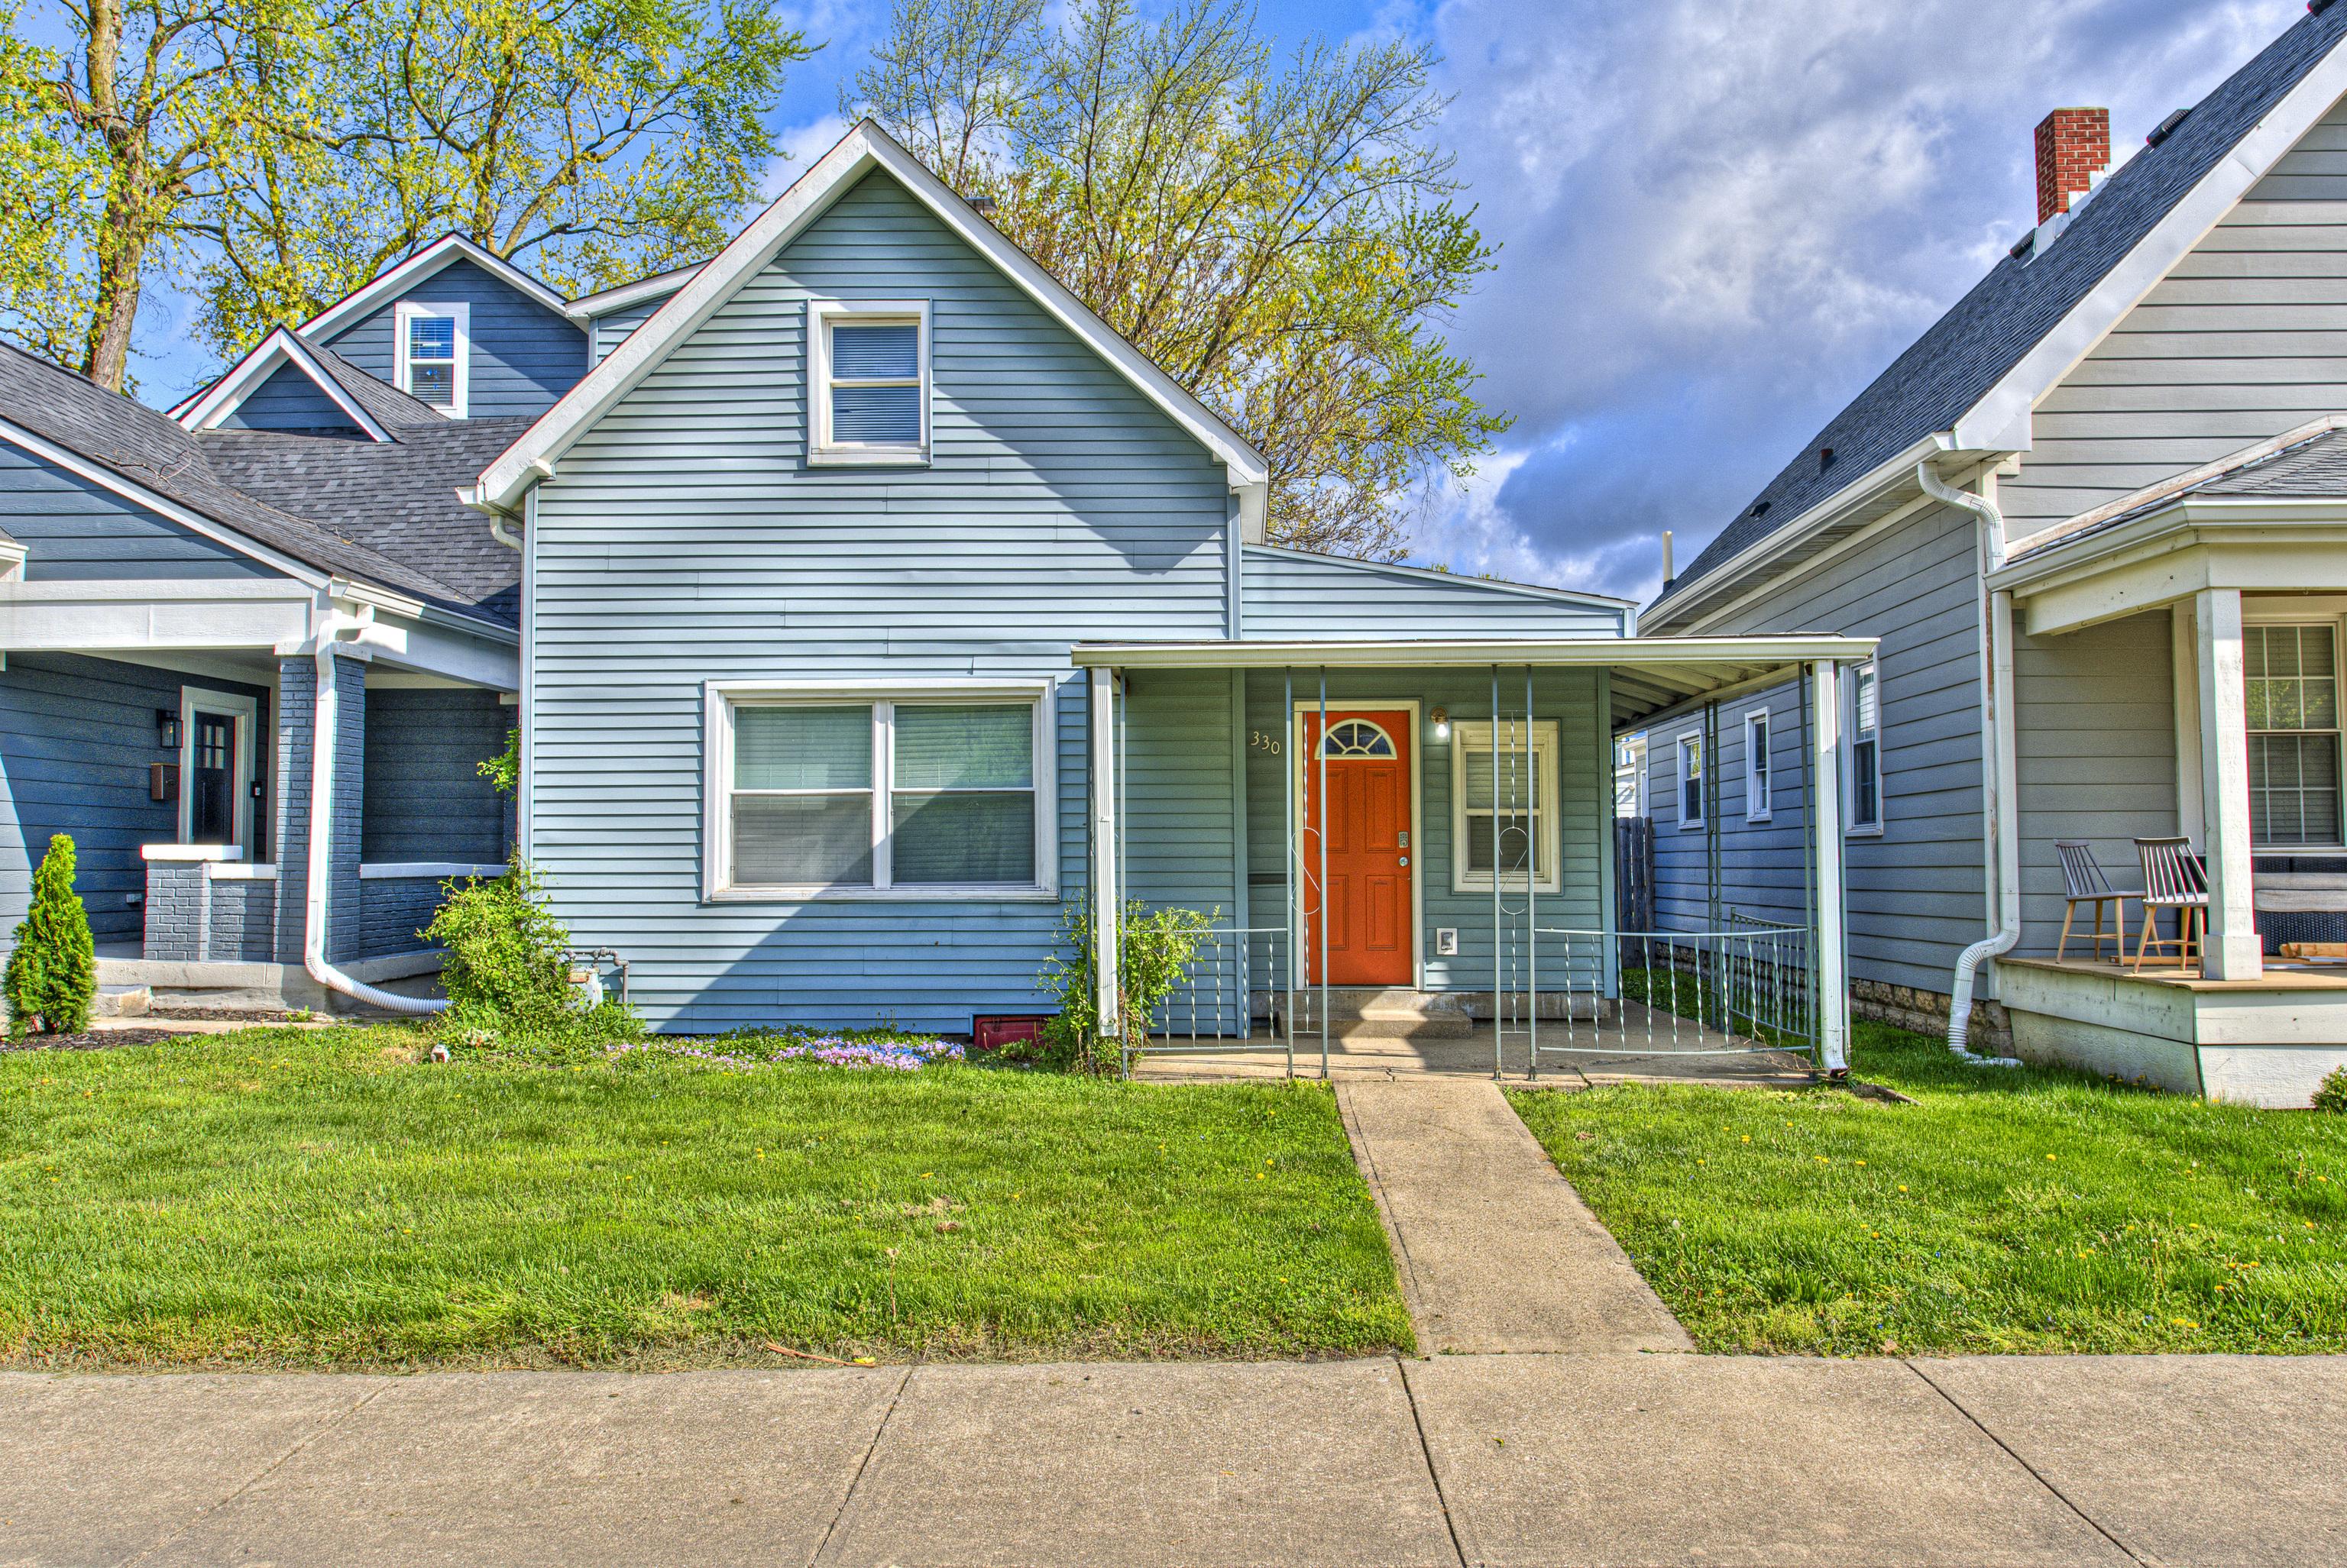 Photo one of 330 Iowa St Indianapolis IN 46225 | MLS 21974731